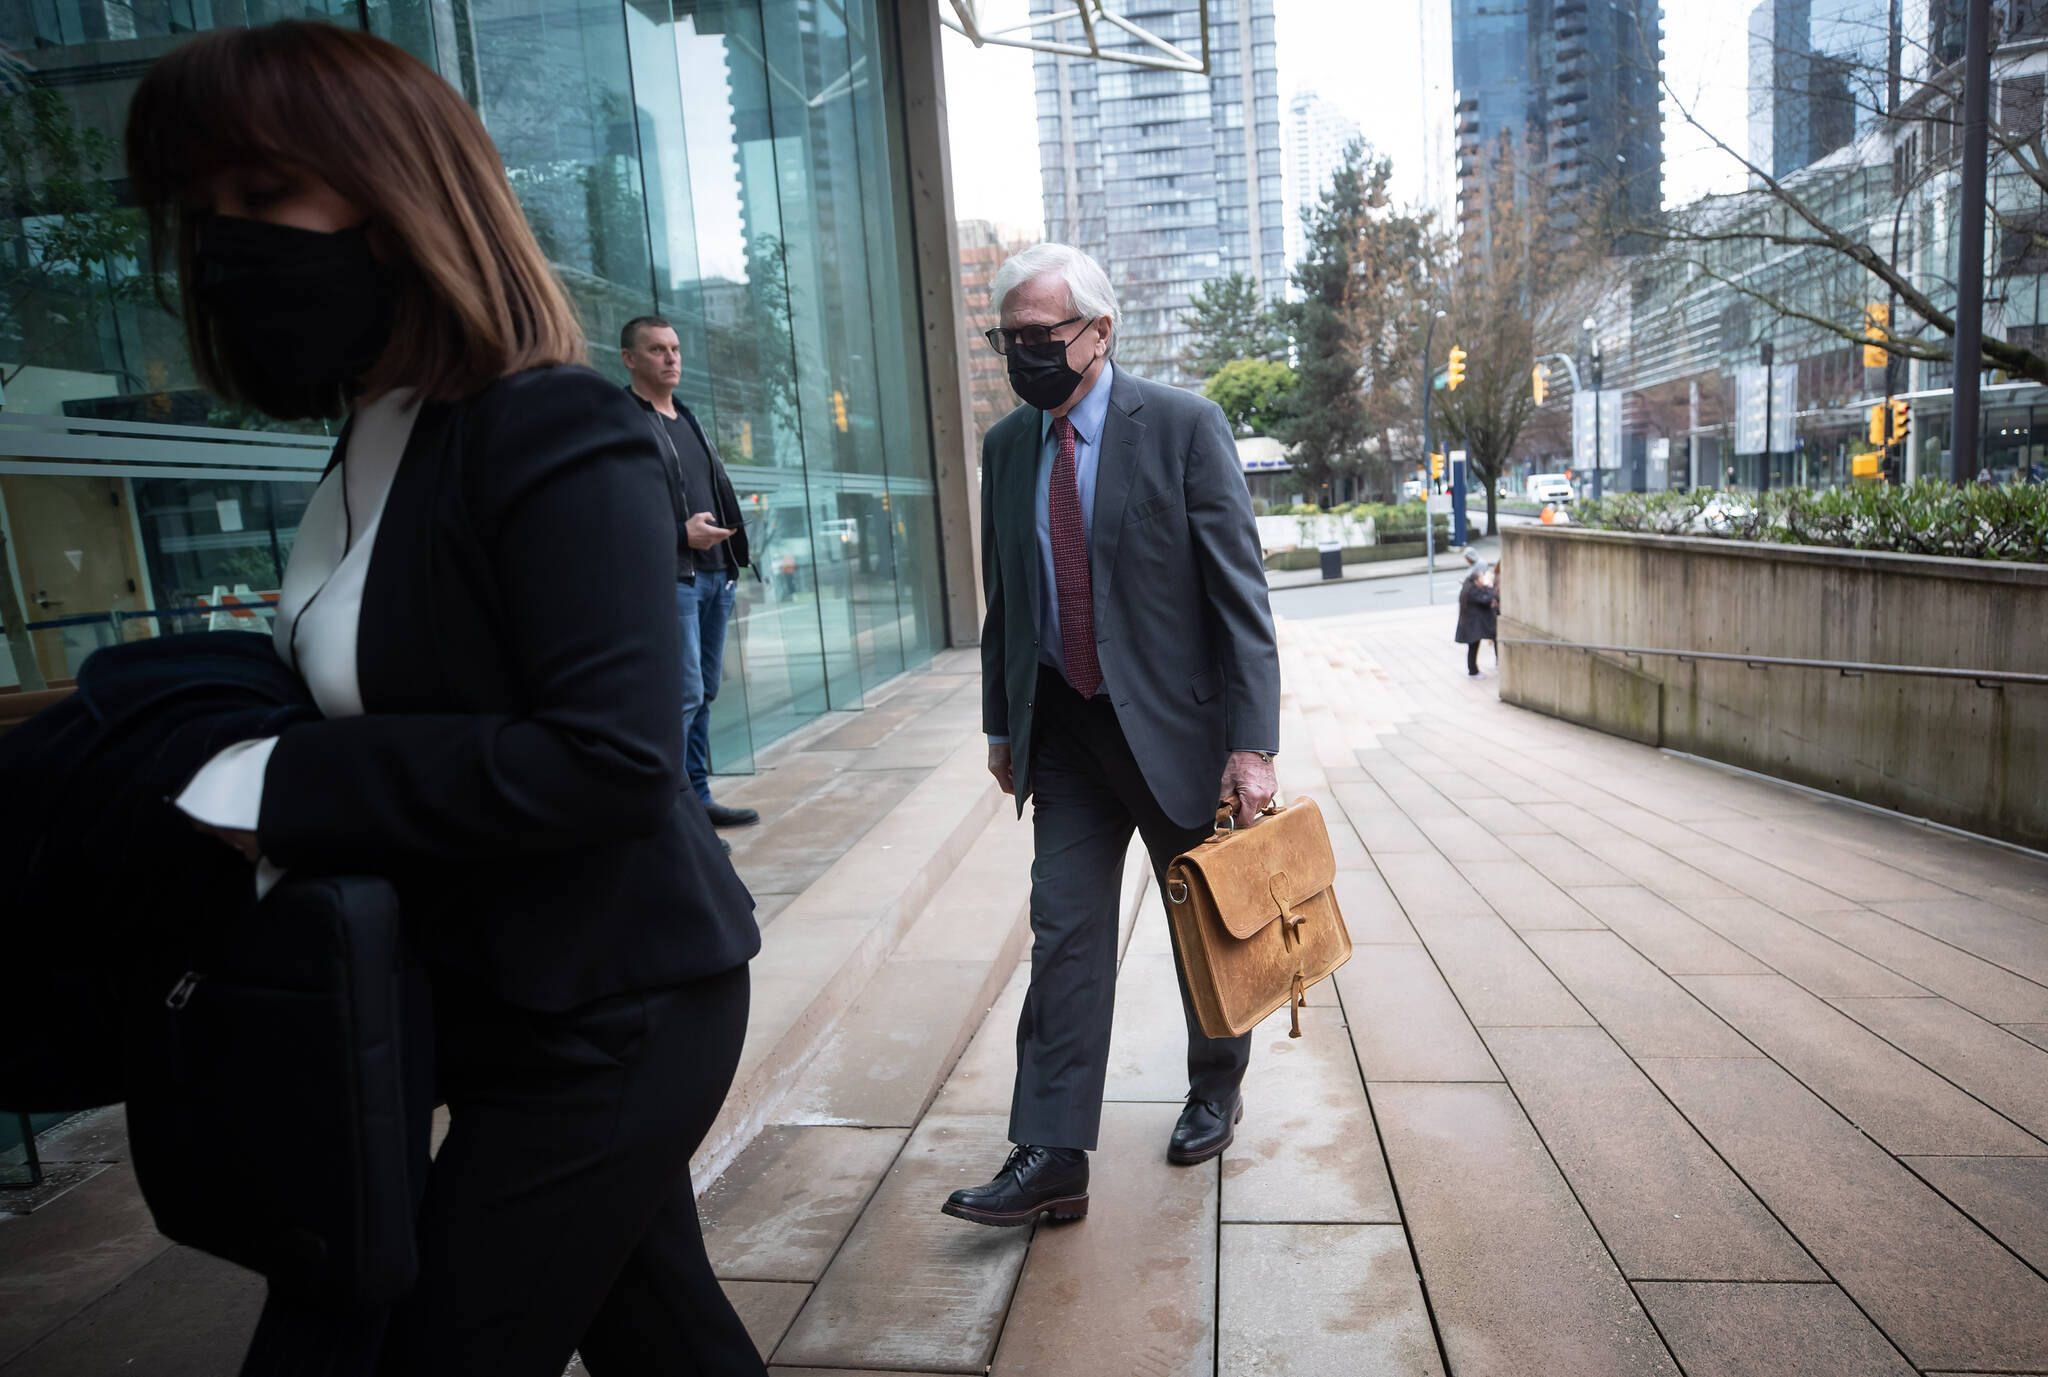 Craig James, former clerk of the B.C. legislative assembly, arrives back at B.C. Supreme Court after a break from his trial, in Vancouver, on Tuesday, March 1, 2022. A special prosecutor says British Columbia’s former clerk of the legislative assembly used public funds to enrich himself in “glaring and egregious” ways during closing arguments. James’s defence is expected to present its case Wednesday. THE CANADIAN PRESS/Darryl Dyck